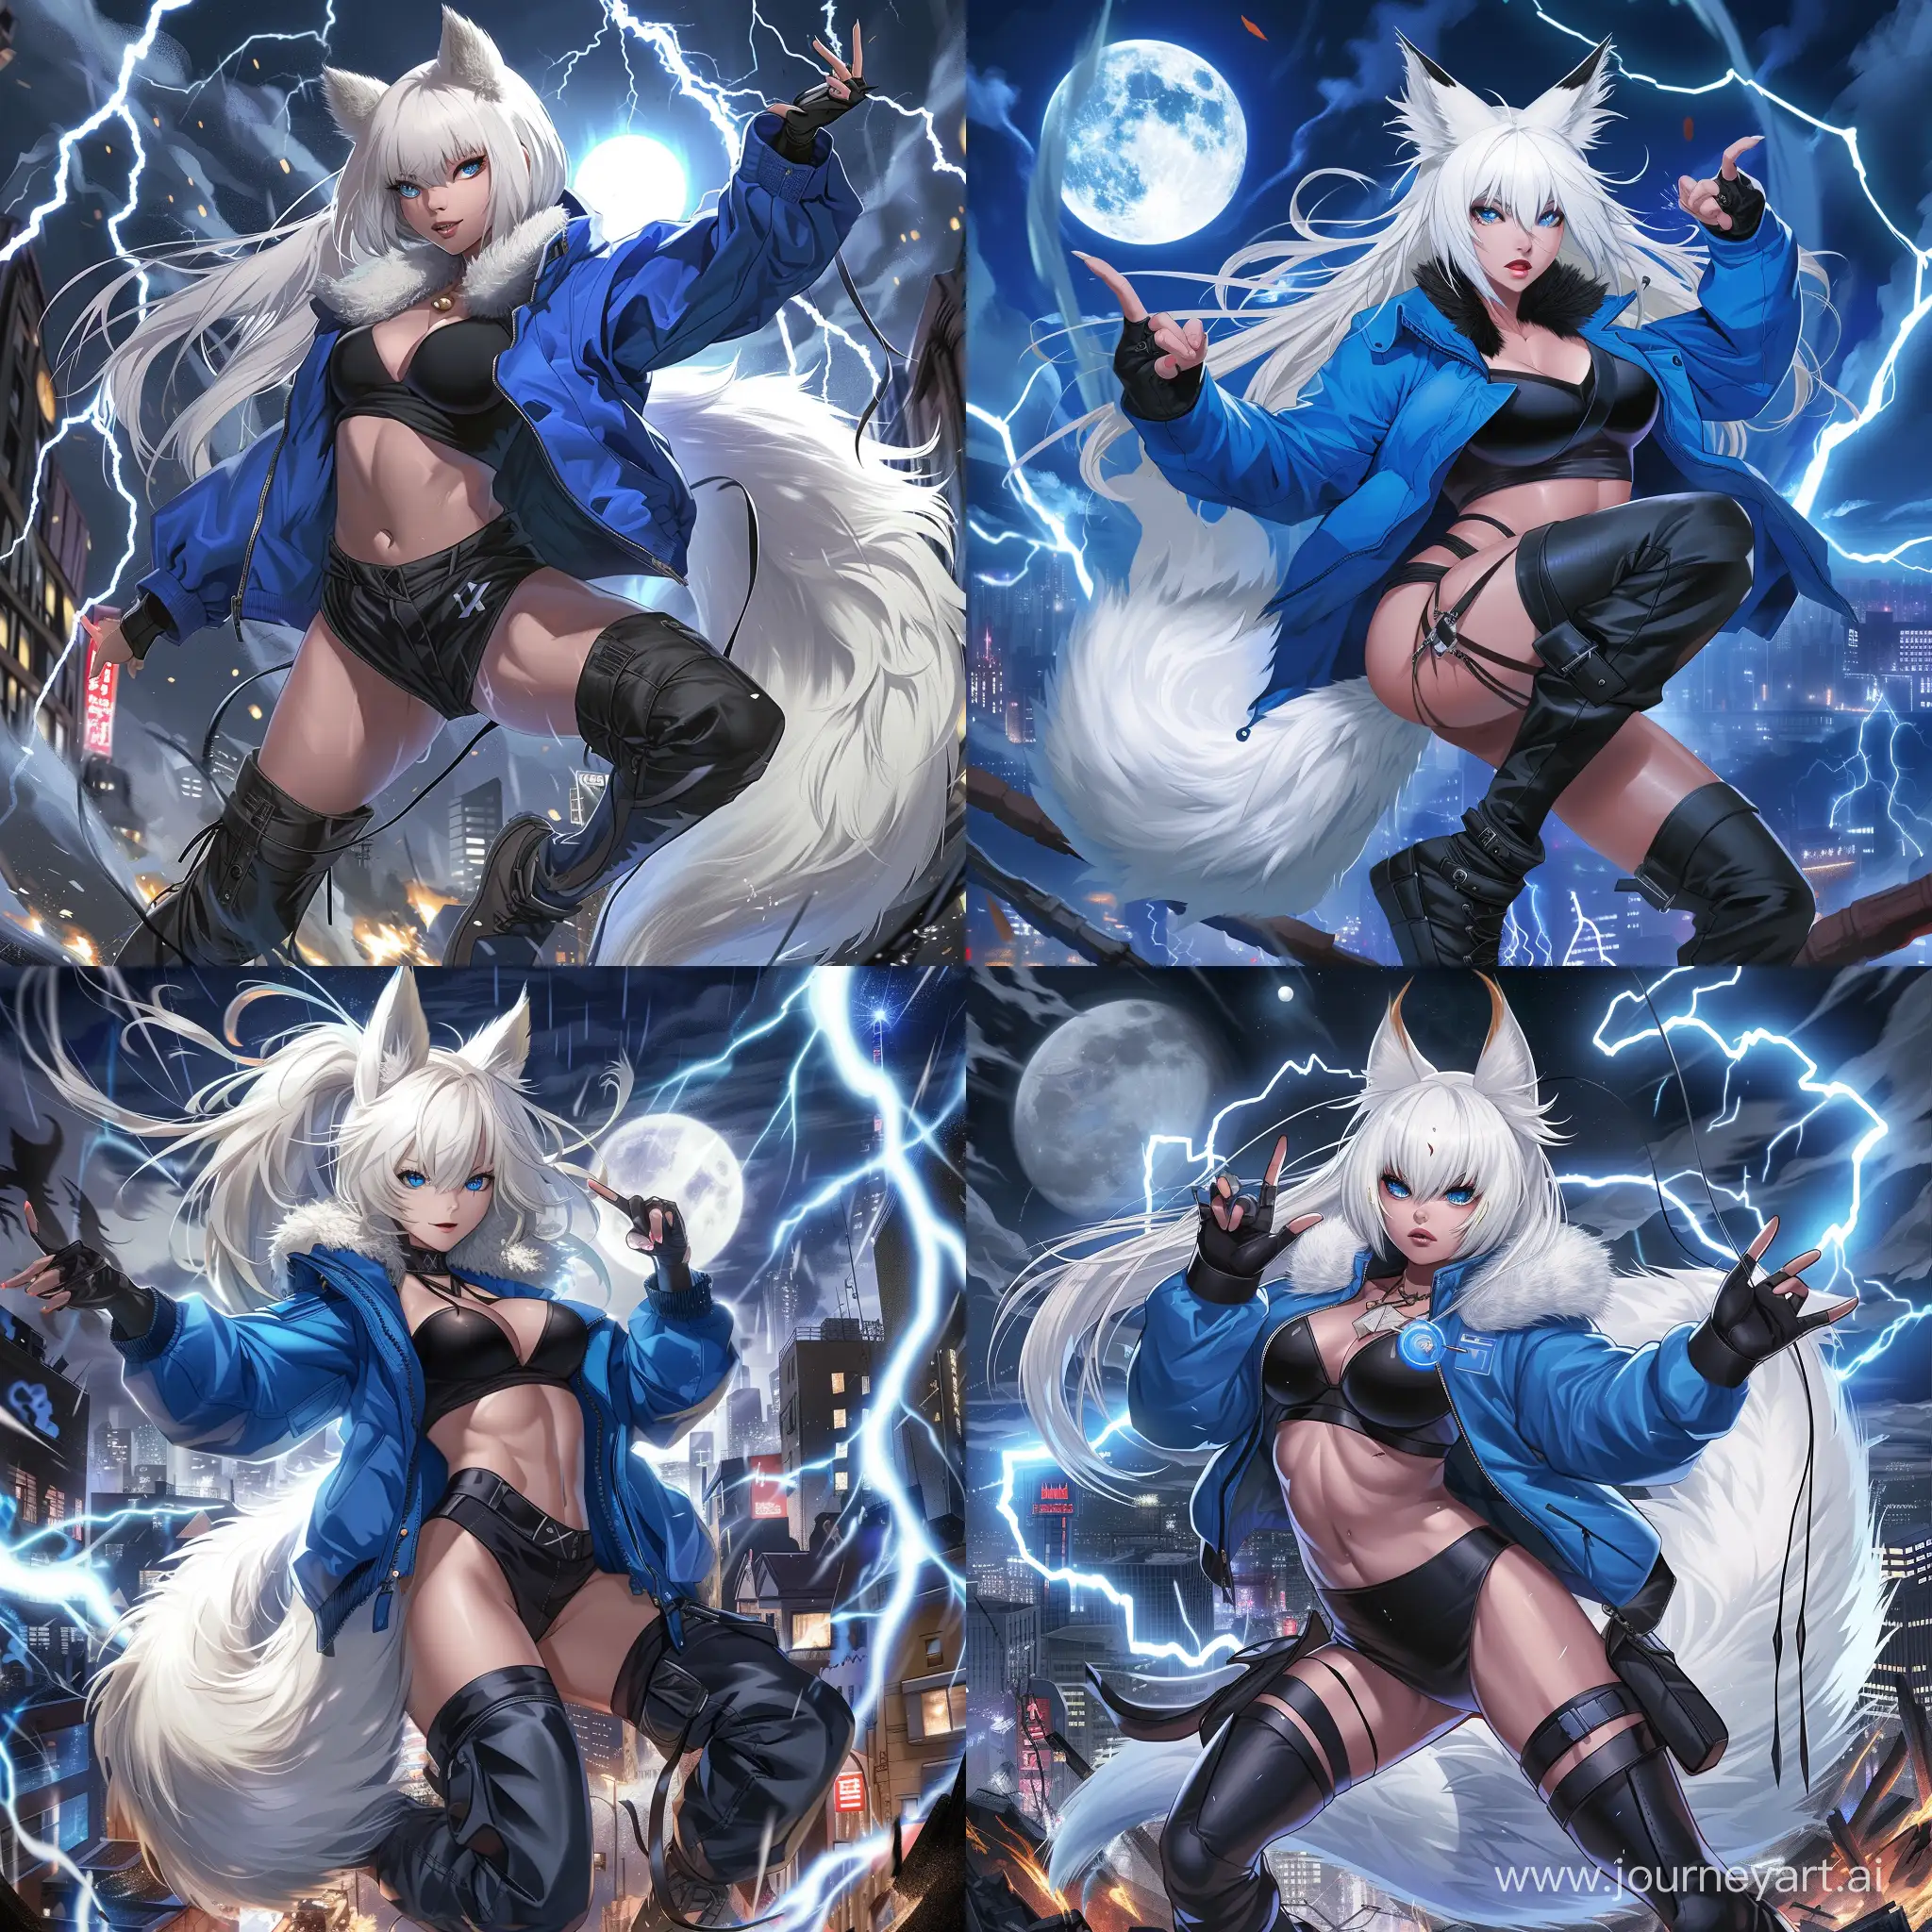 anime-style, full body, athletic, muscular, tan skin, adult, asian woman, long white hair, white fox ears, white fox tail attached to her waist, fierce blue eyes, blue jacket, black leotard, long baggy black cargo pants, black boots, fingerless black leather gloves, dynamic pose, martial arts, city, night, full moon, fur collar, using lightning magic, surrounded by lightning